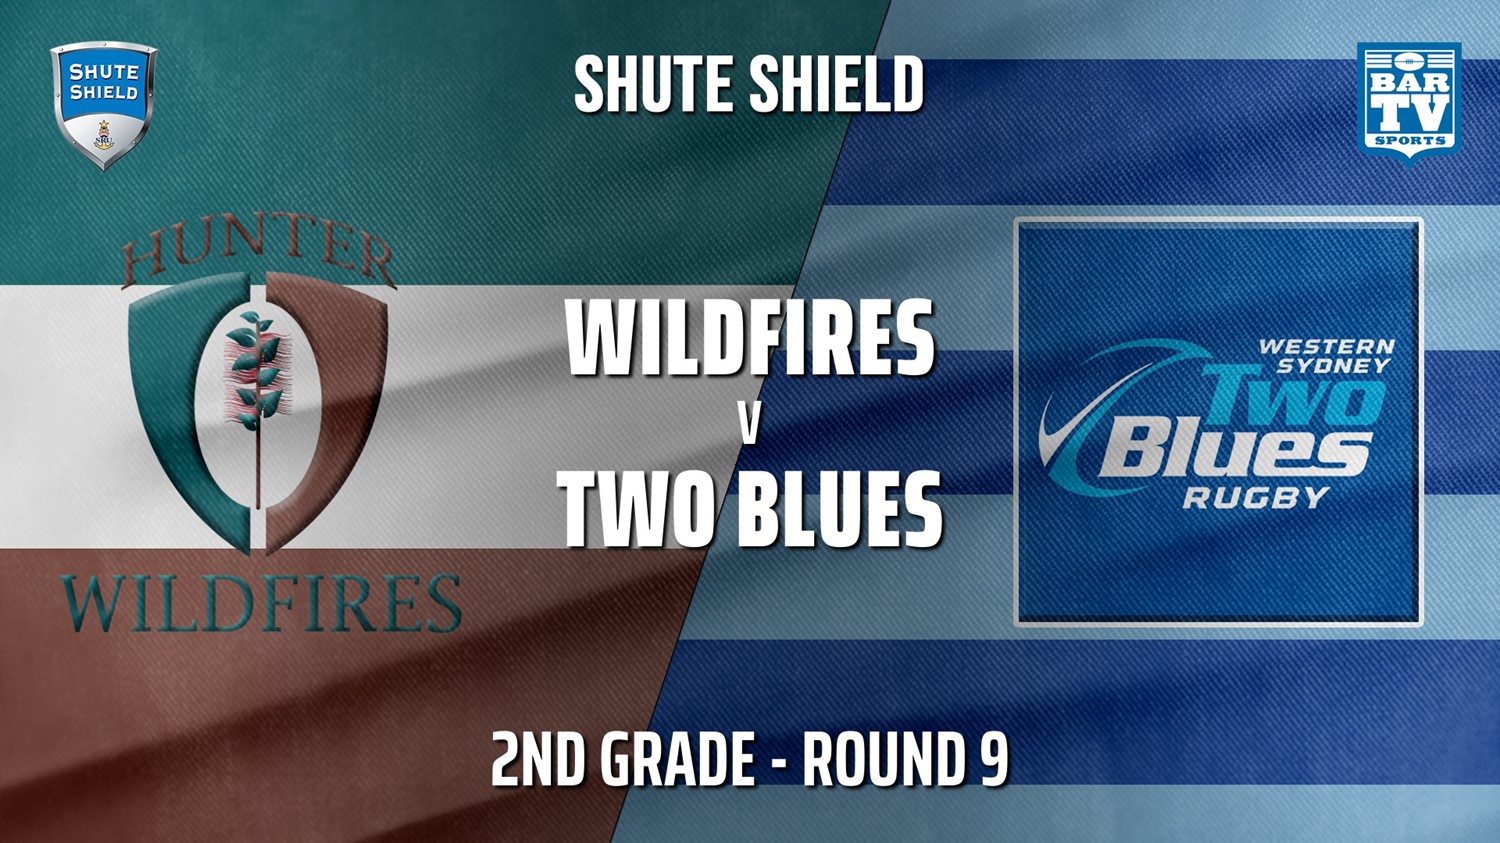 210605-Shute Shield Round 9 - 2nd Grade - Hunter Wildfires v Two Blues Minigame Slate Image